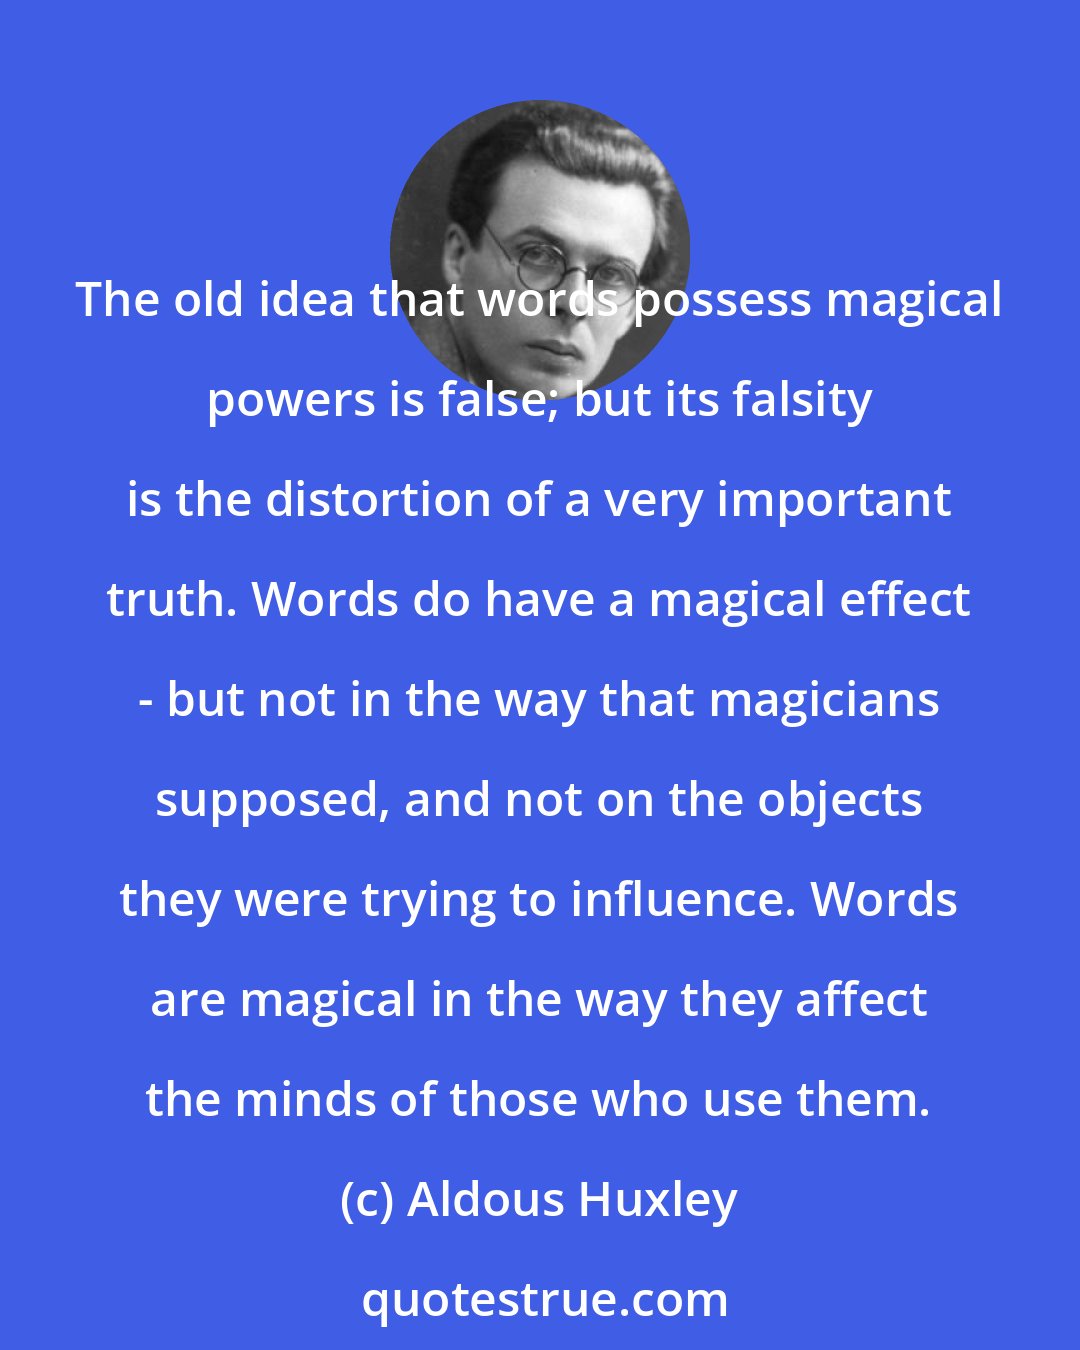 Aldous Huxley: The old idea that words possess magical powers is false; but its falsity is the distortion of a very important truth. Words do have a magical effect - but not in the way that magicians supposed, and not on the objects they were trying to influence. Words are magical in the way they affect the minds of those who use them.